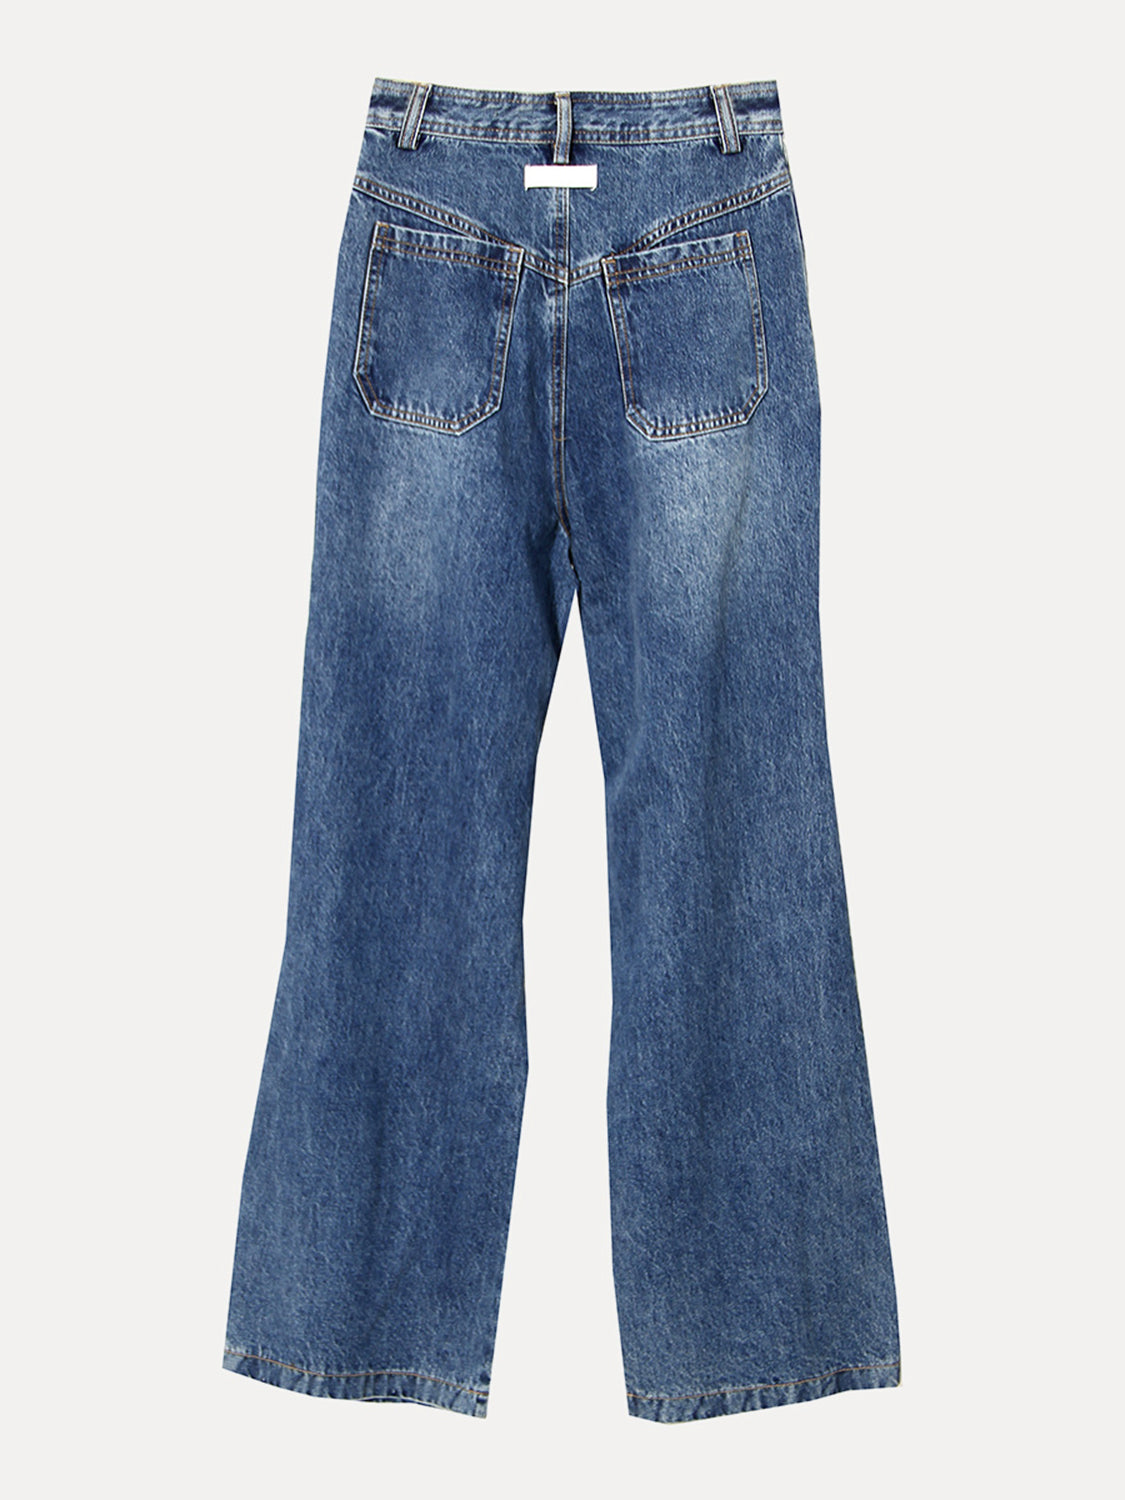 Lace Up Bootcut Jeans with Pockets BLUE ZONE PLANET